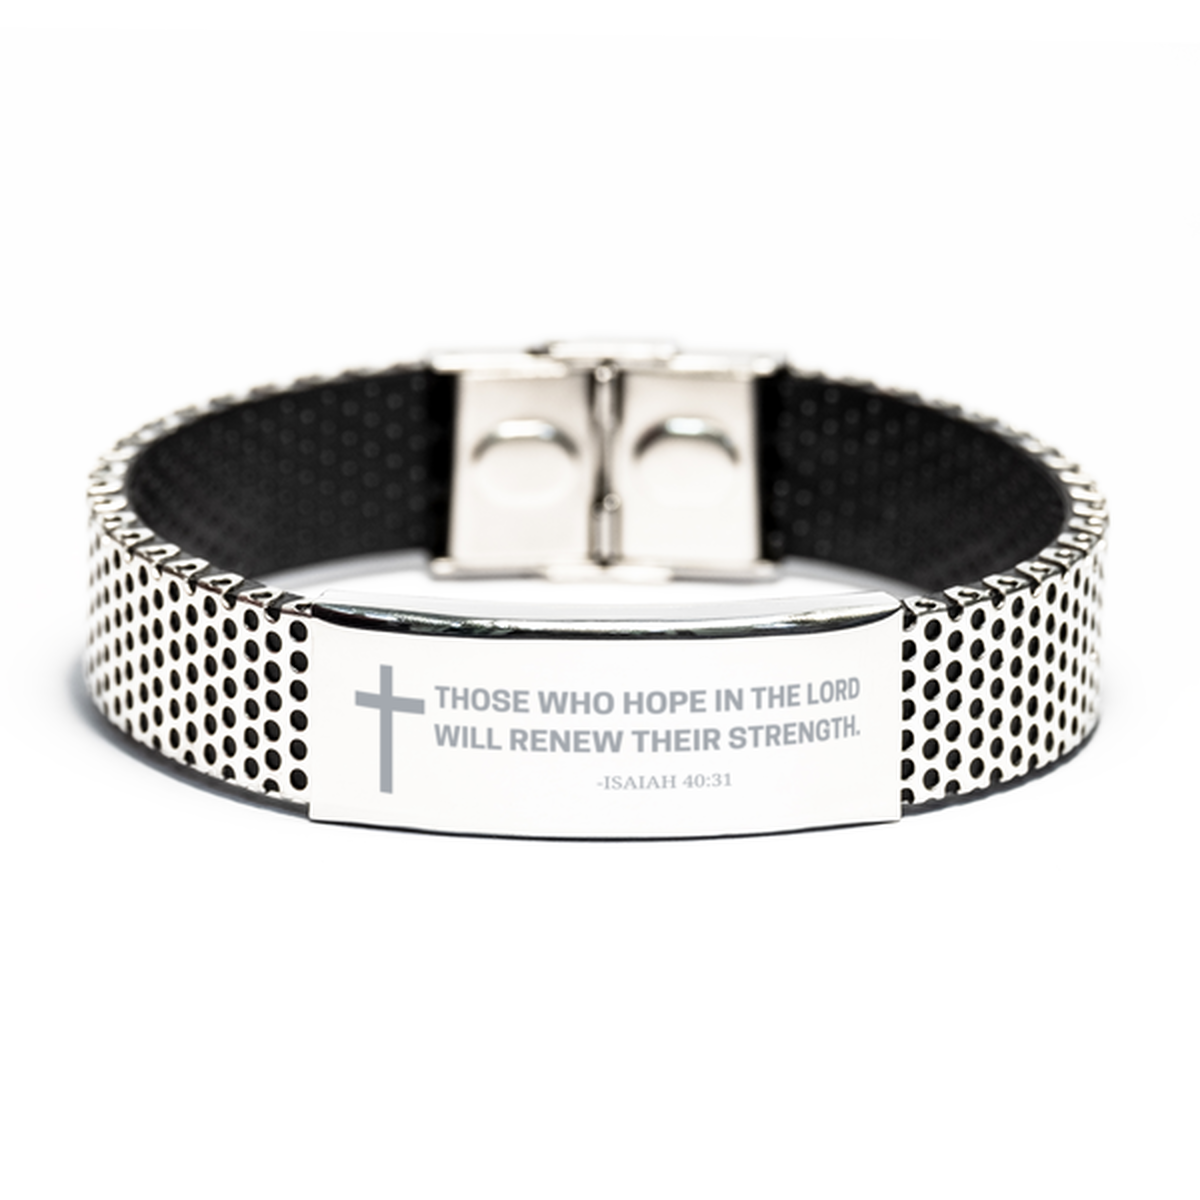 Baptism Gifts For Teenage Boys Girls, Christian Bible Verse Stainless Steel Bracelet, Those who hope in the Lord, Catholic Confirmation Gifts for Son, Godson, Grandson, Nephew